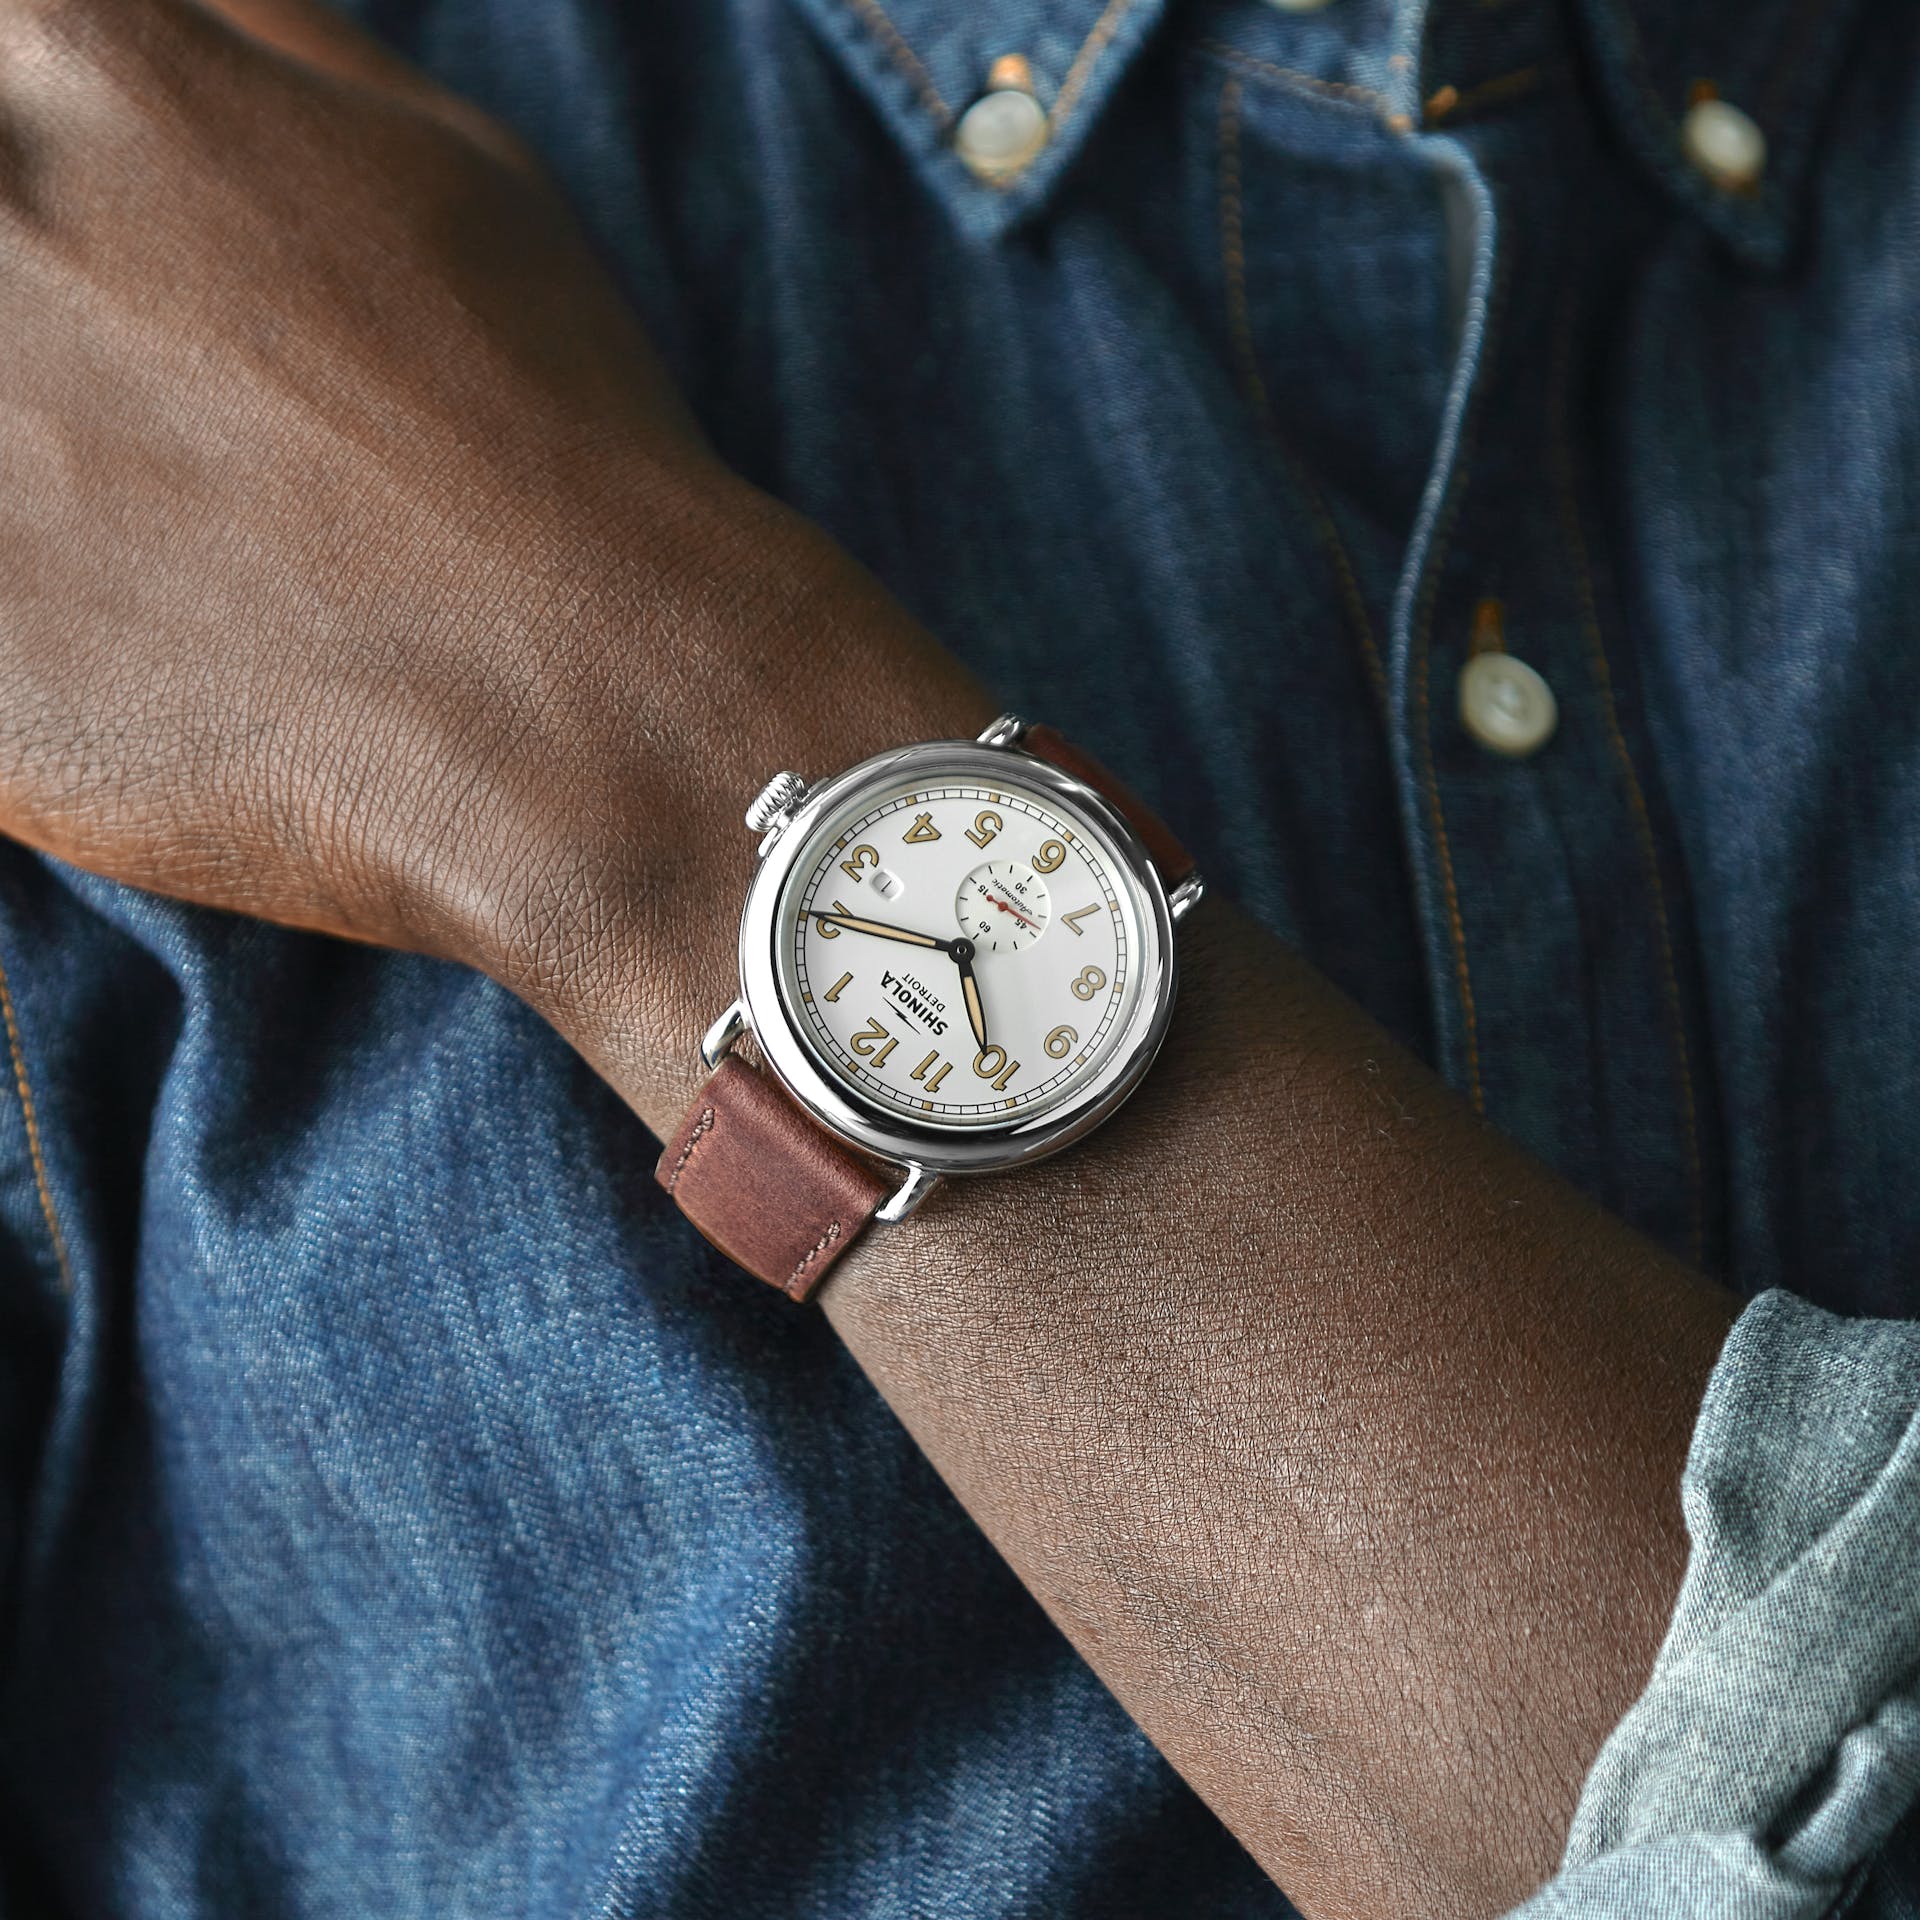 The Story Behind 'Built In Detroit' Shinola Watches